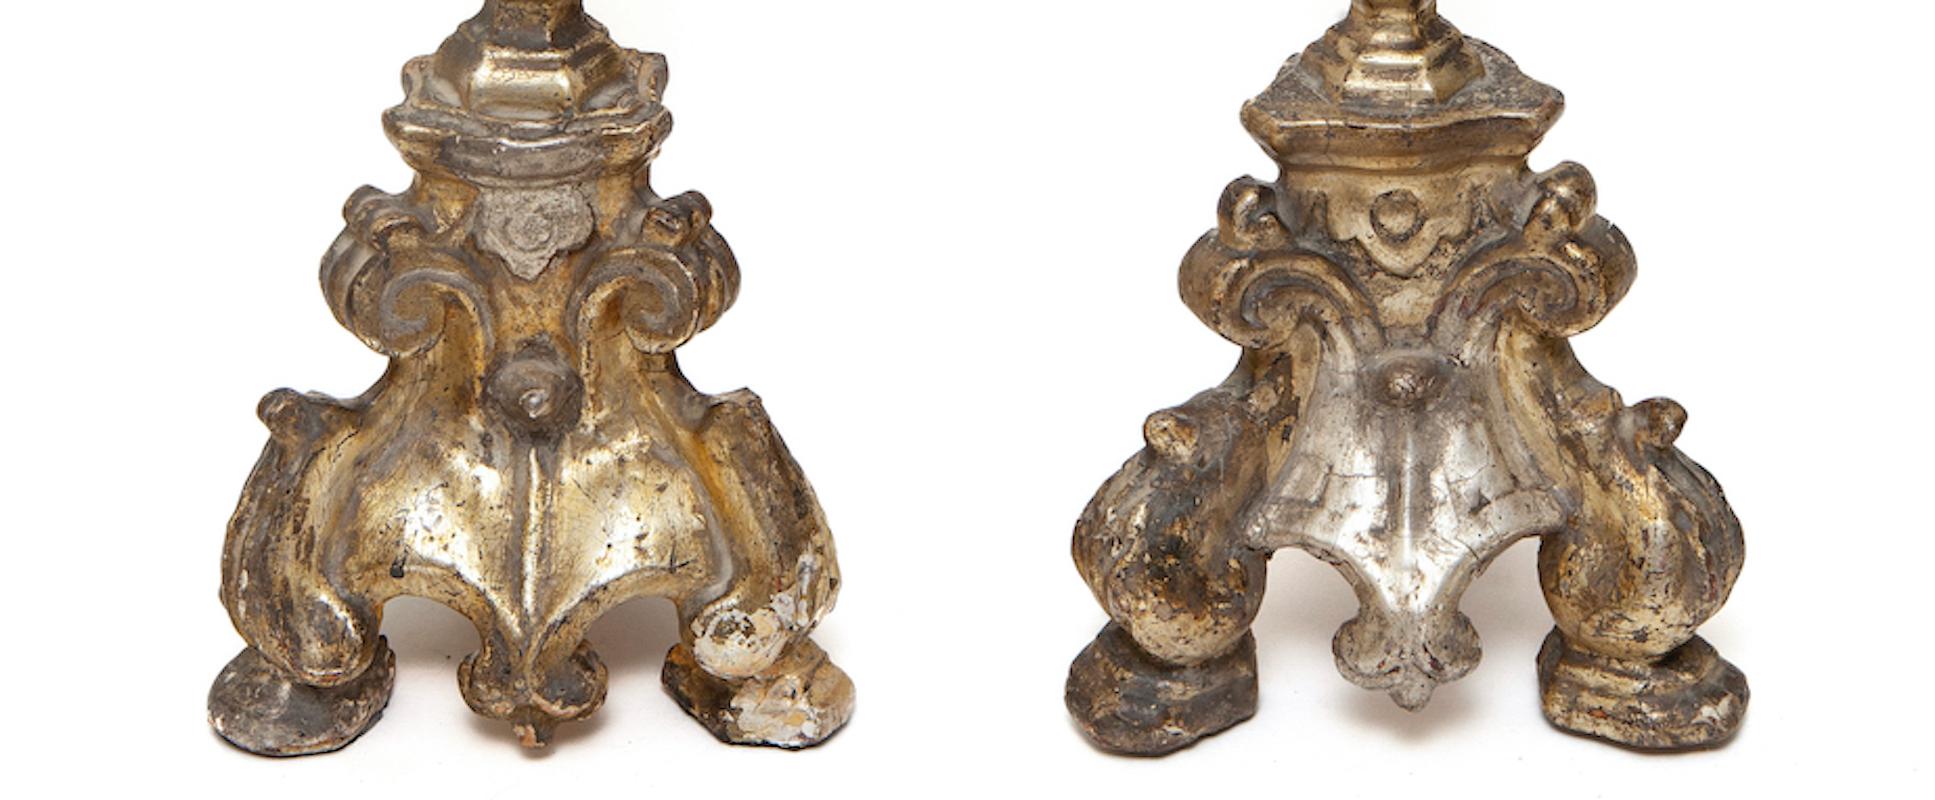 Late 17th Century Lamps Table Pair Candlesticks Silver Gilt 17th Century Baroque Italian 29